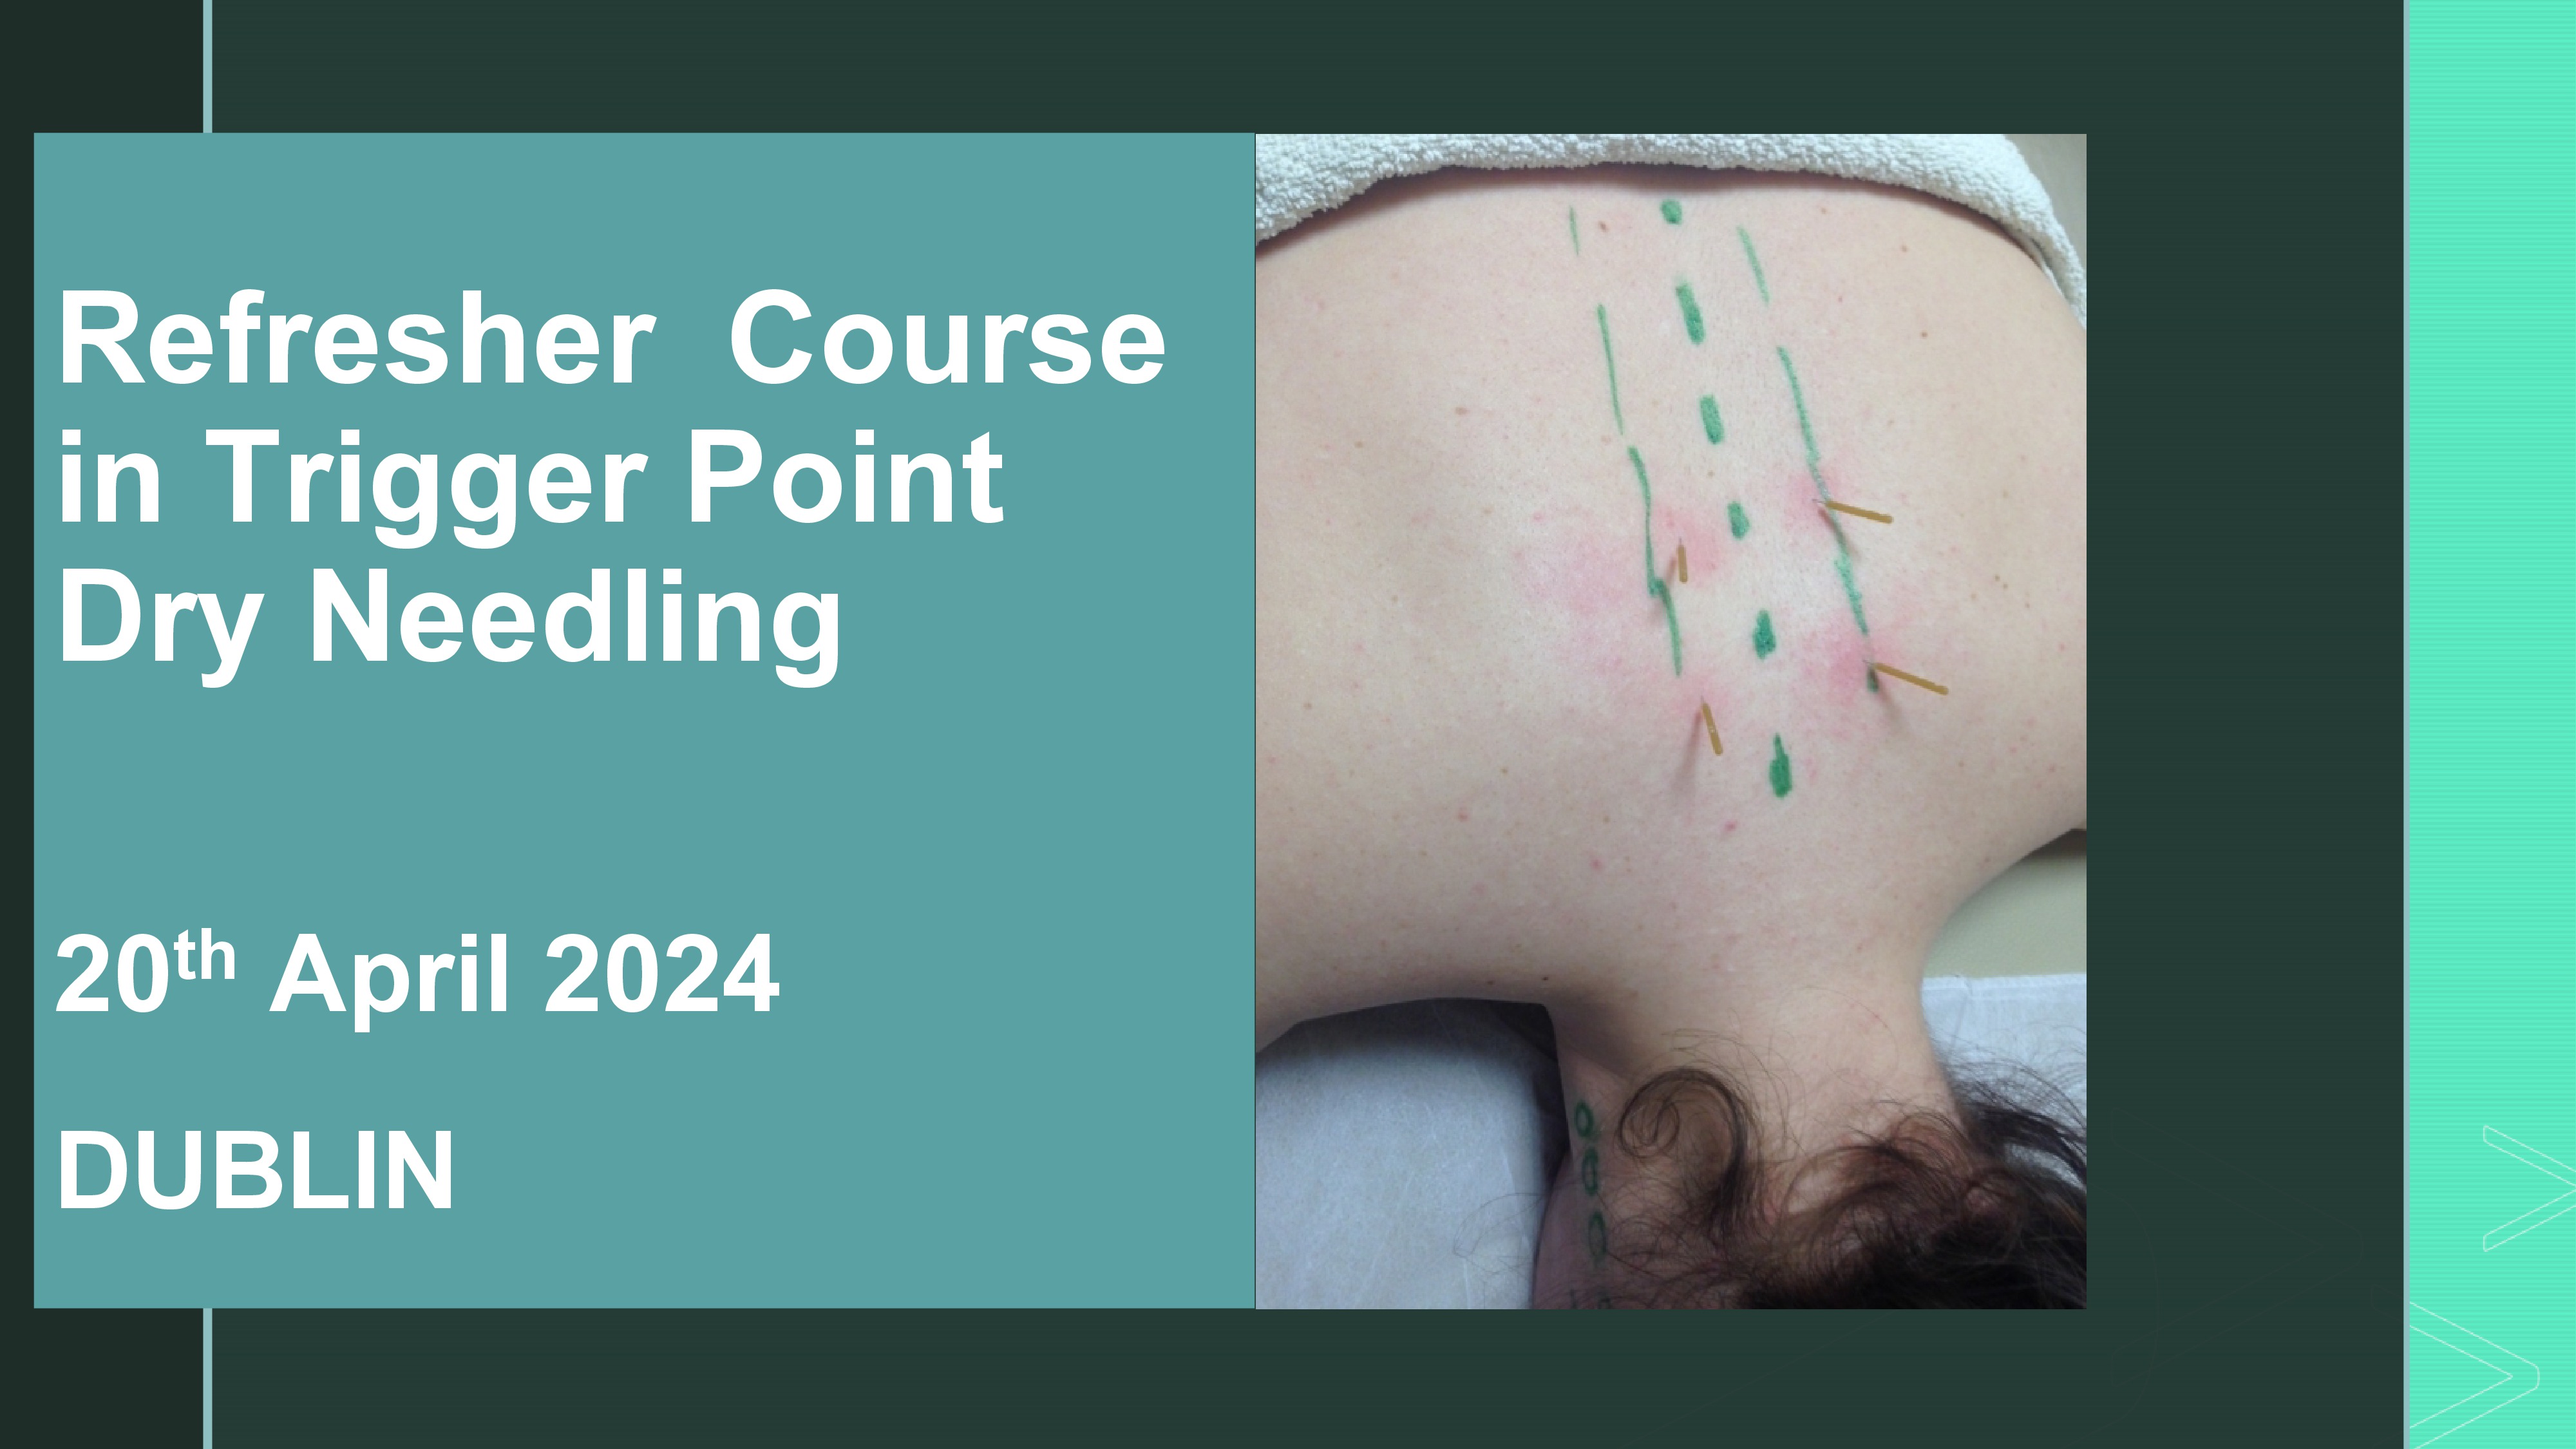 Refresher Course in Trigger Point Dry Needling 20th April 2024 DUBLIN